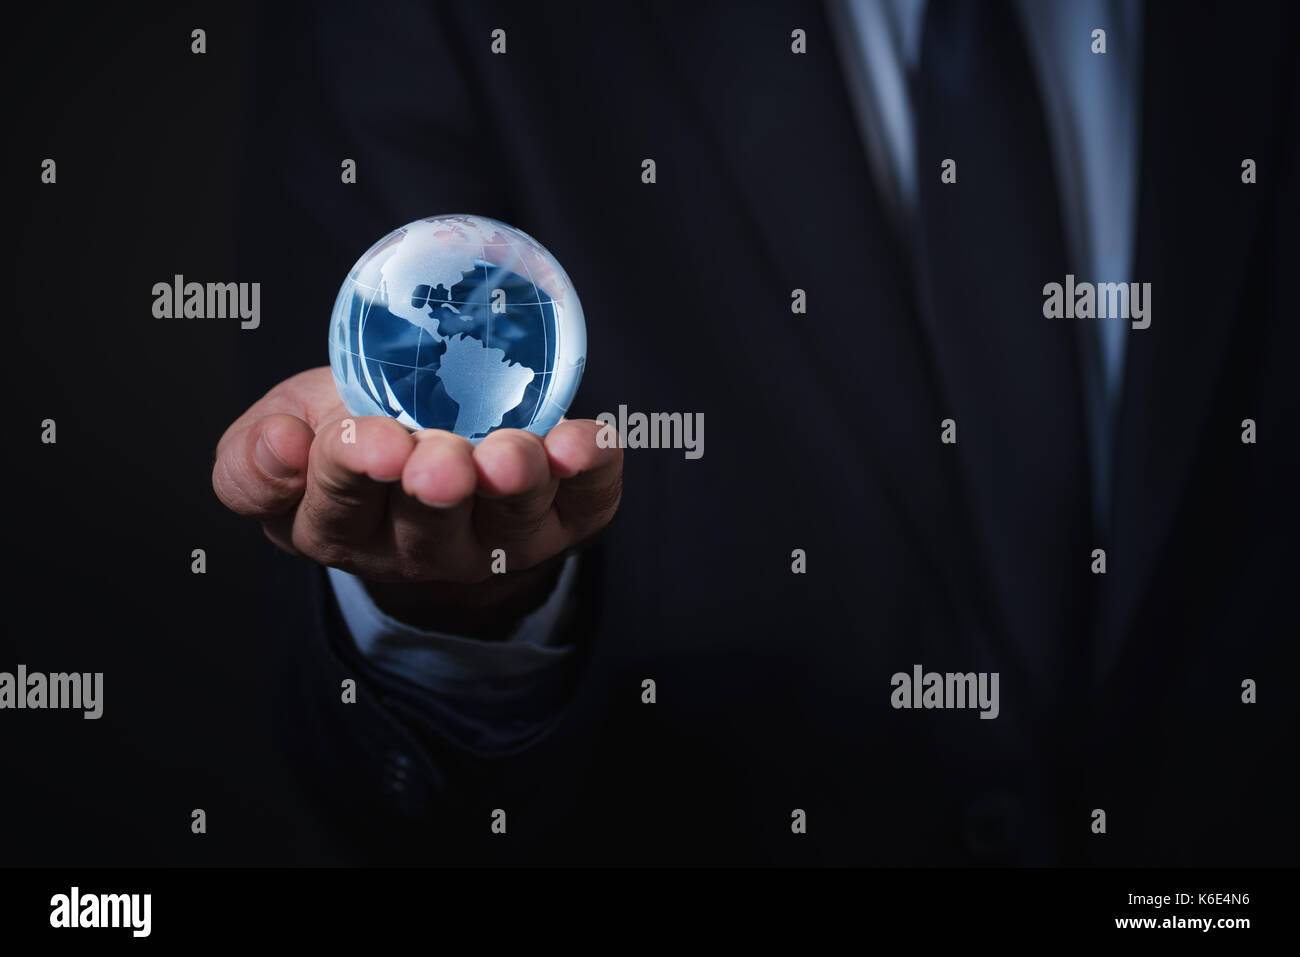 Businessman holds shiny blue Earth in a hand Stock Photo